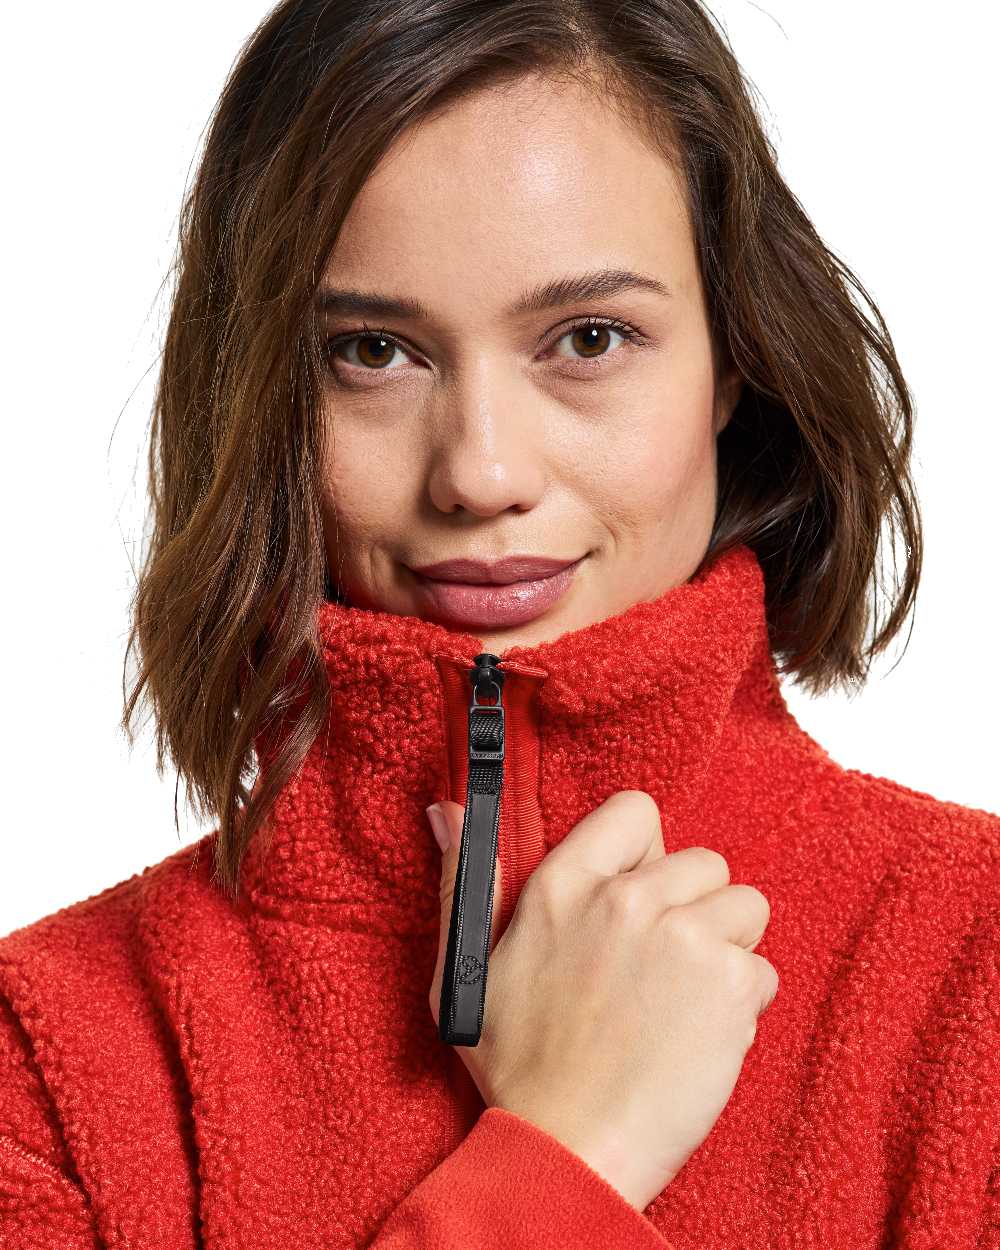 Didriksons Mella Full-Zip Jacket in Pomme Red 